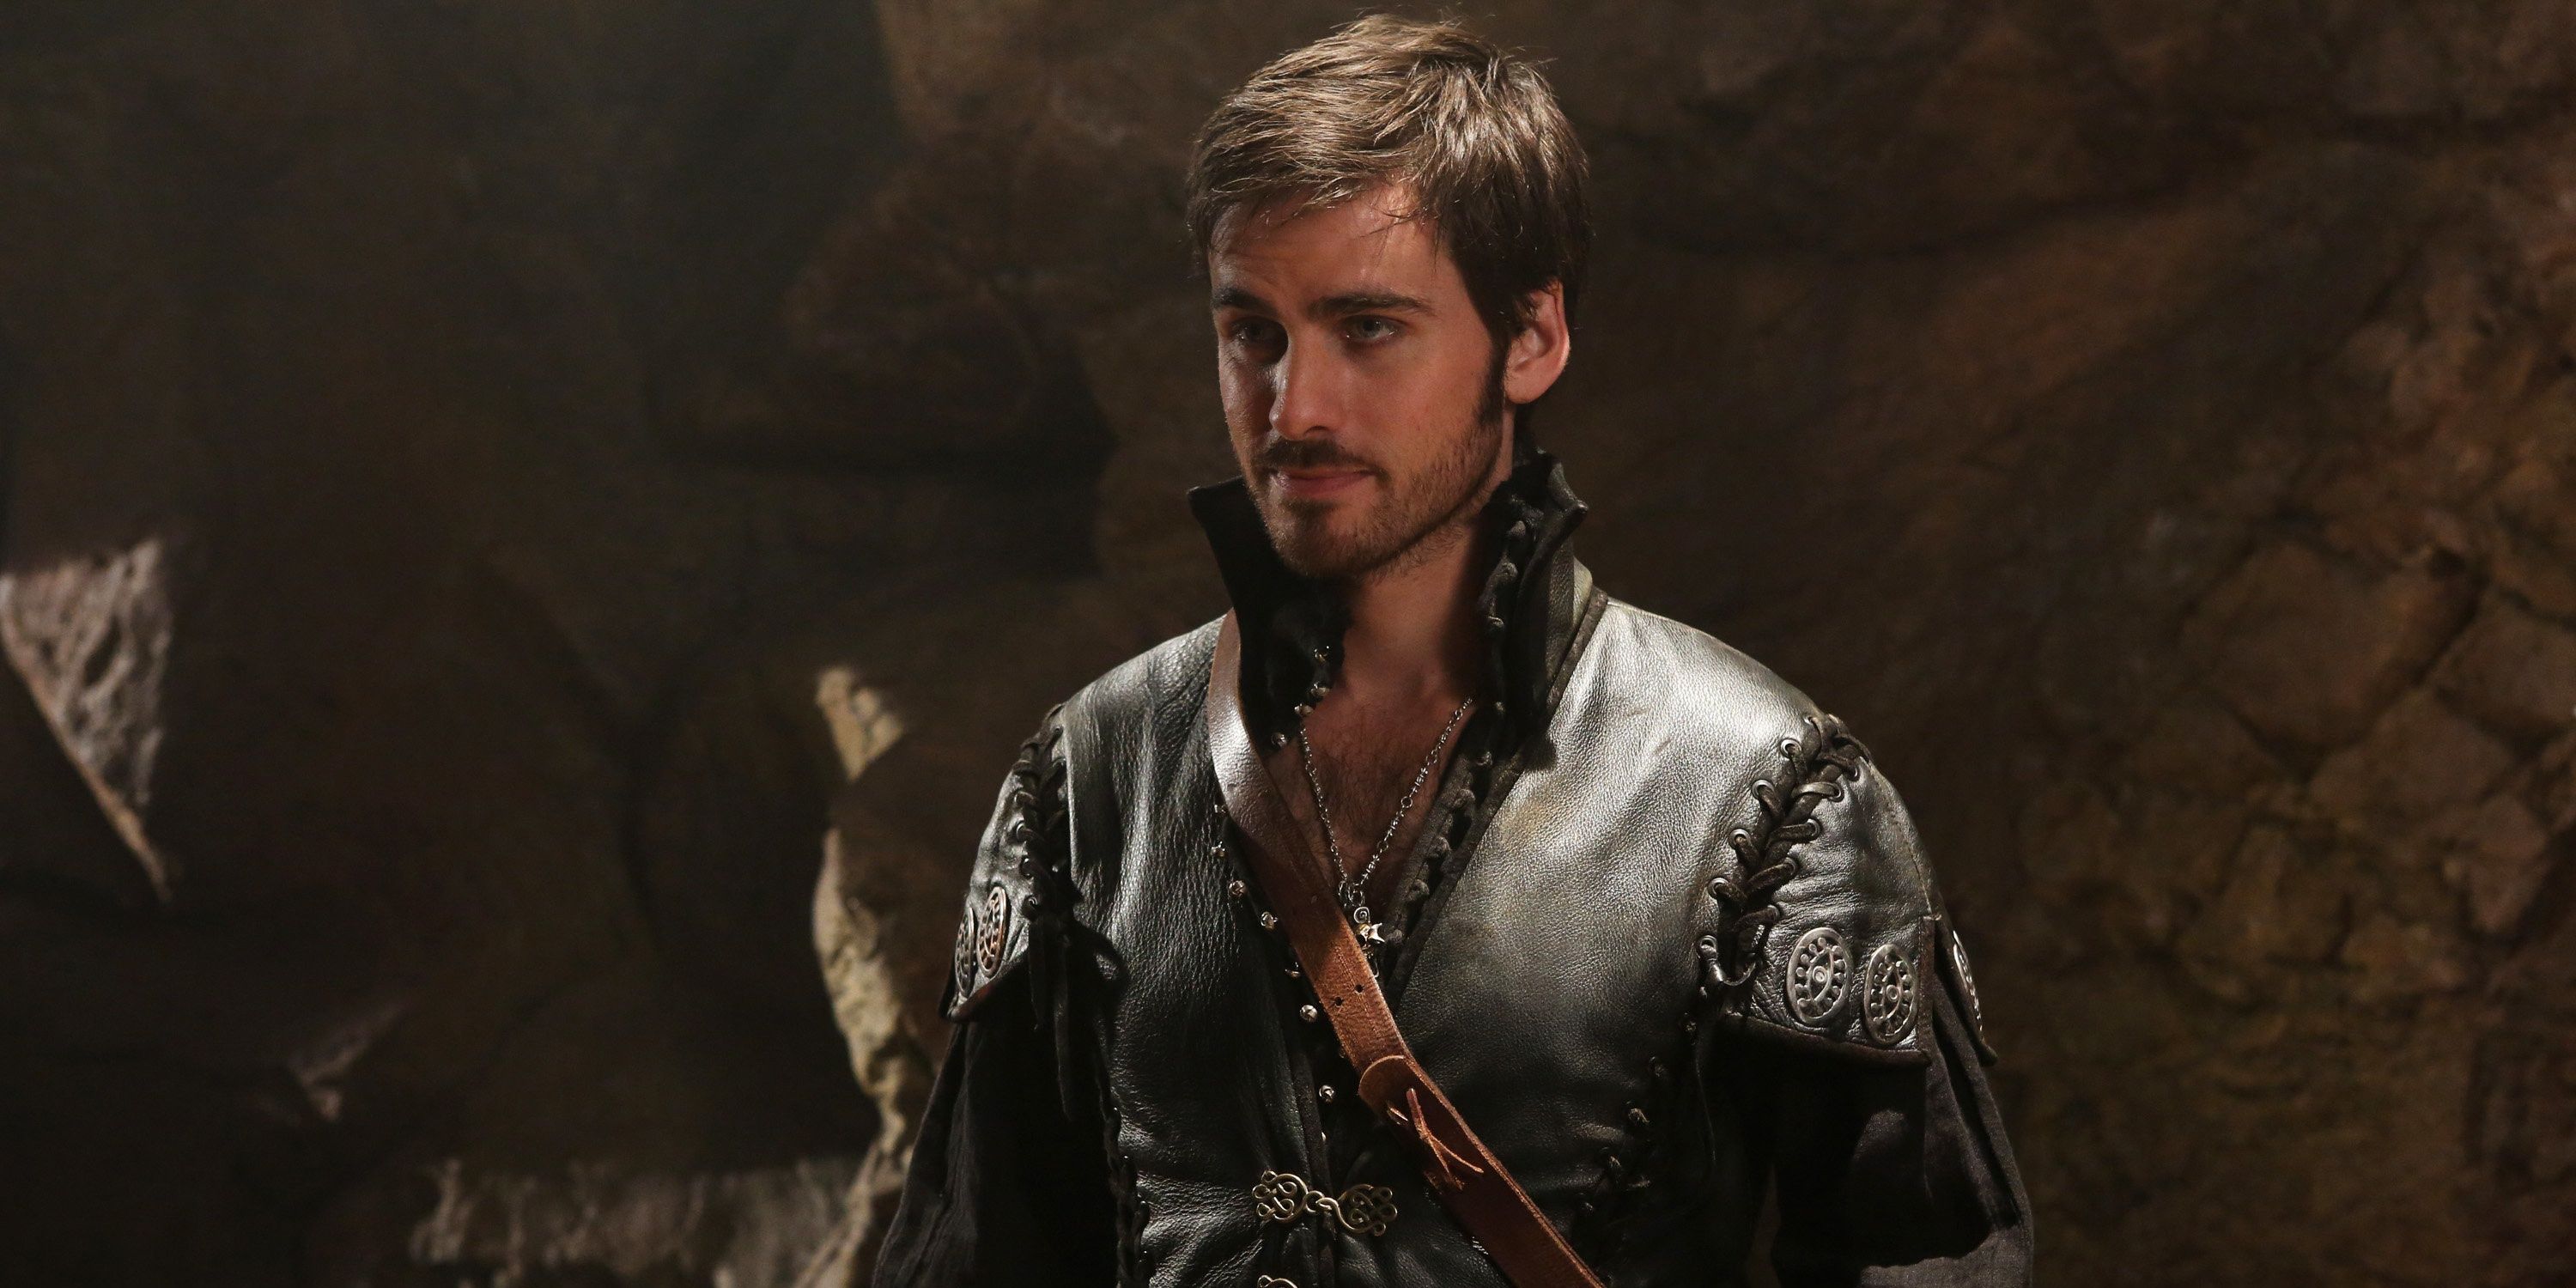 Once Upon A Time 10 Hidden Details About Captain Hook’s Costume You Didn’t Notice